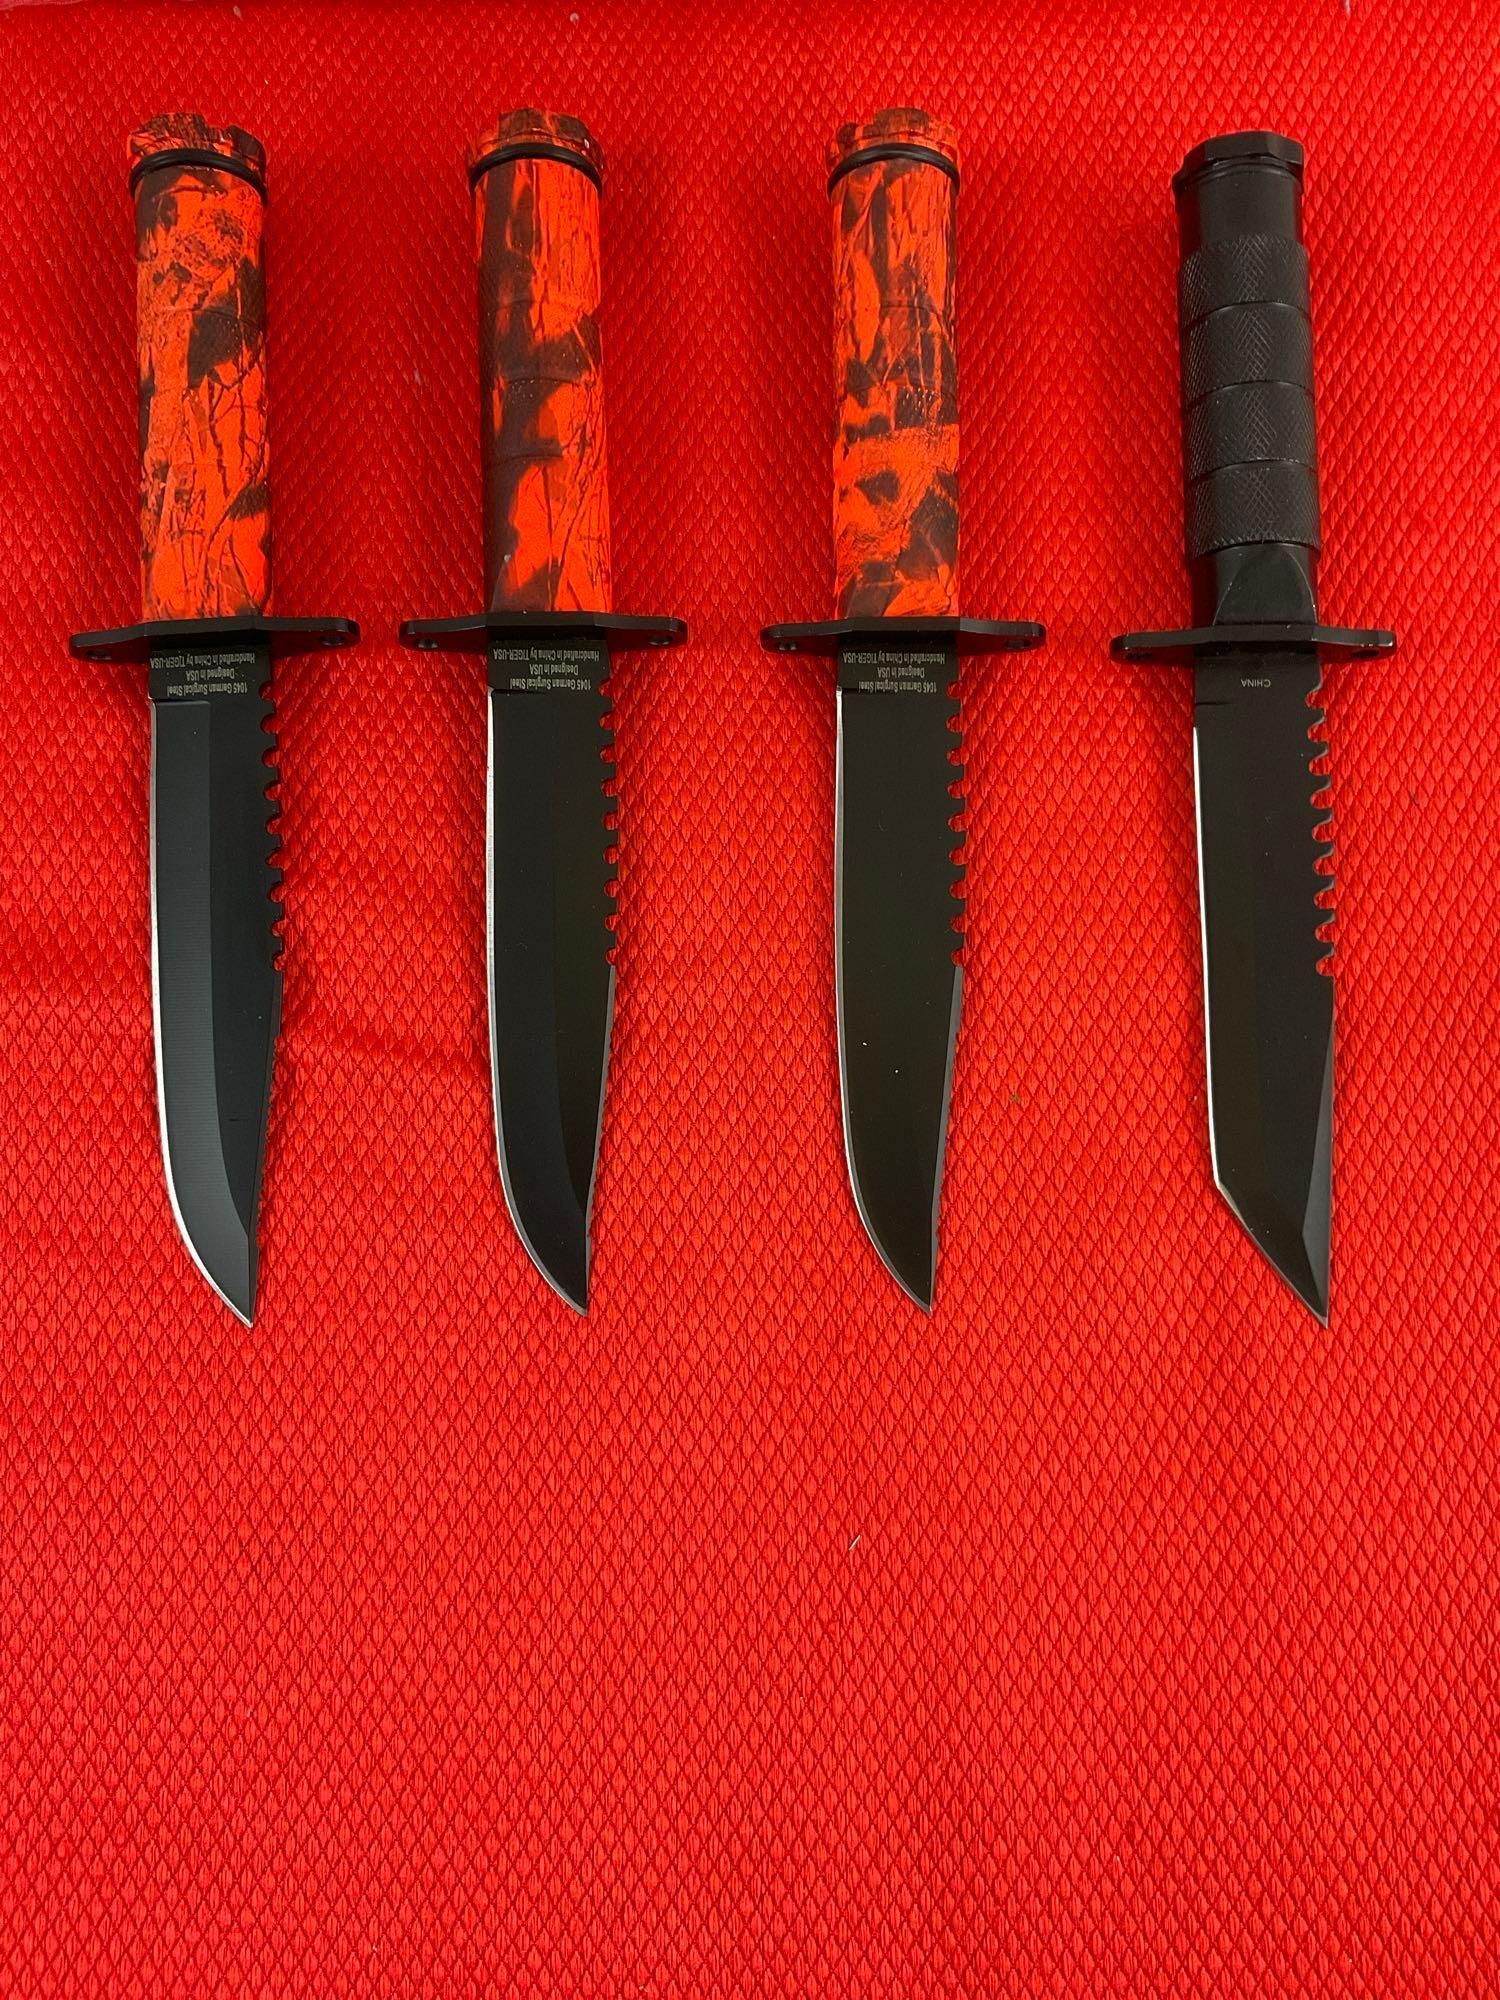 4 pcs 4.5" Fixed Blade Steel Hunting Knives w/ Canvas Sheaths. 3x TigerUSA, 1 Unmarked. See pics.